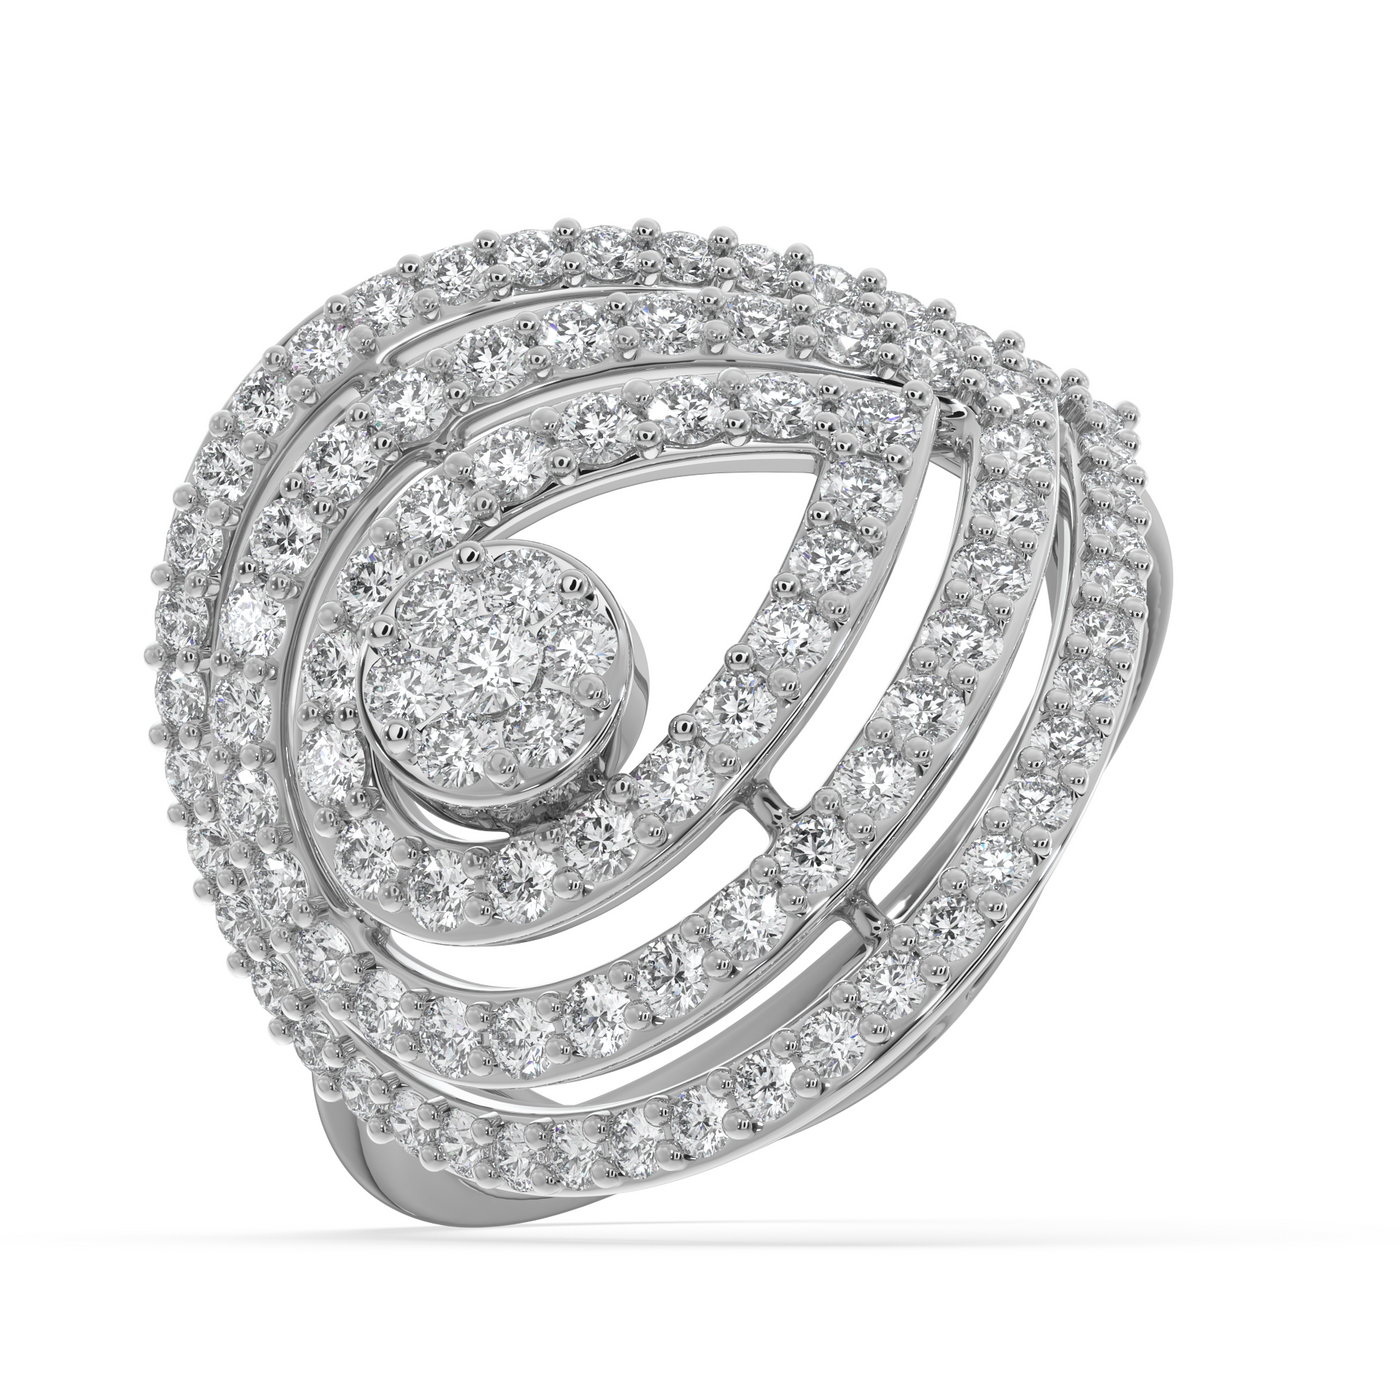 SY Women's Ring in Platinum, Pave Setting